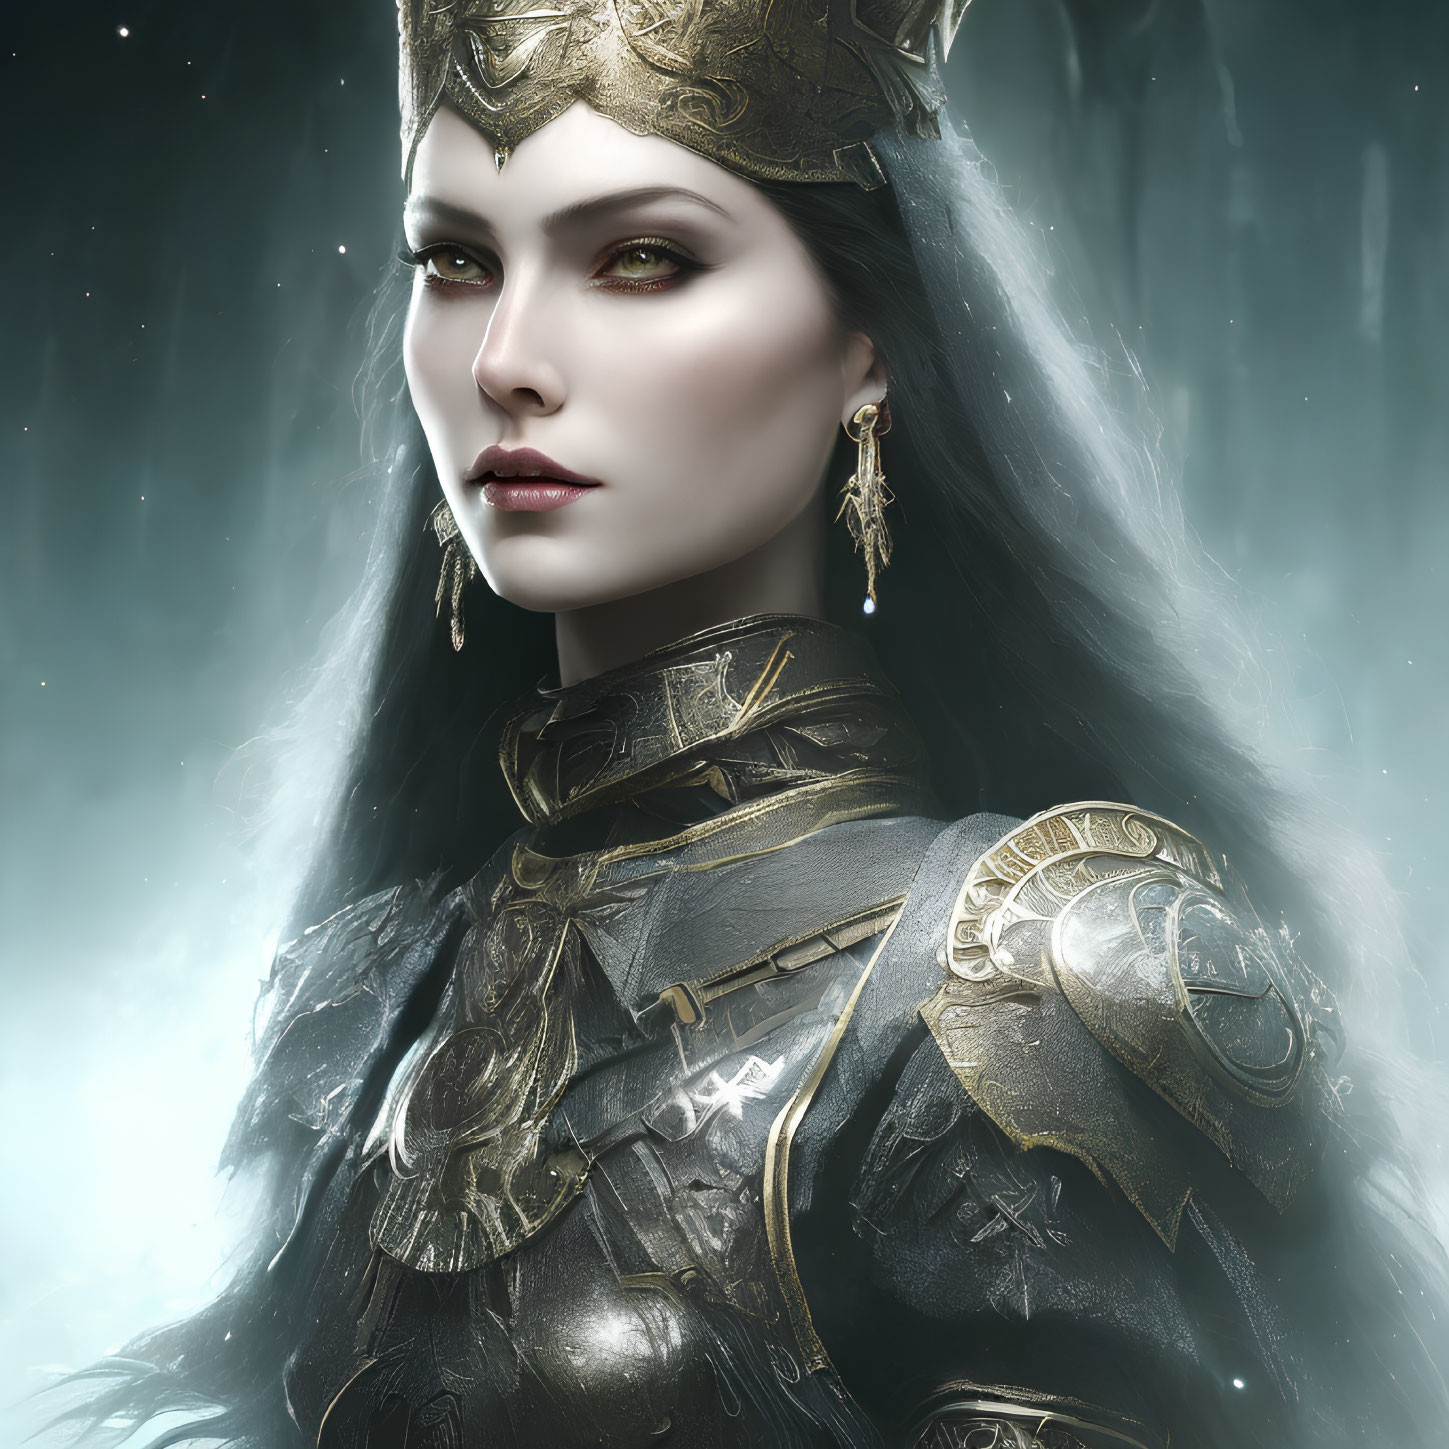 Regal woman portrait with golden crown and armor in misty backdrop